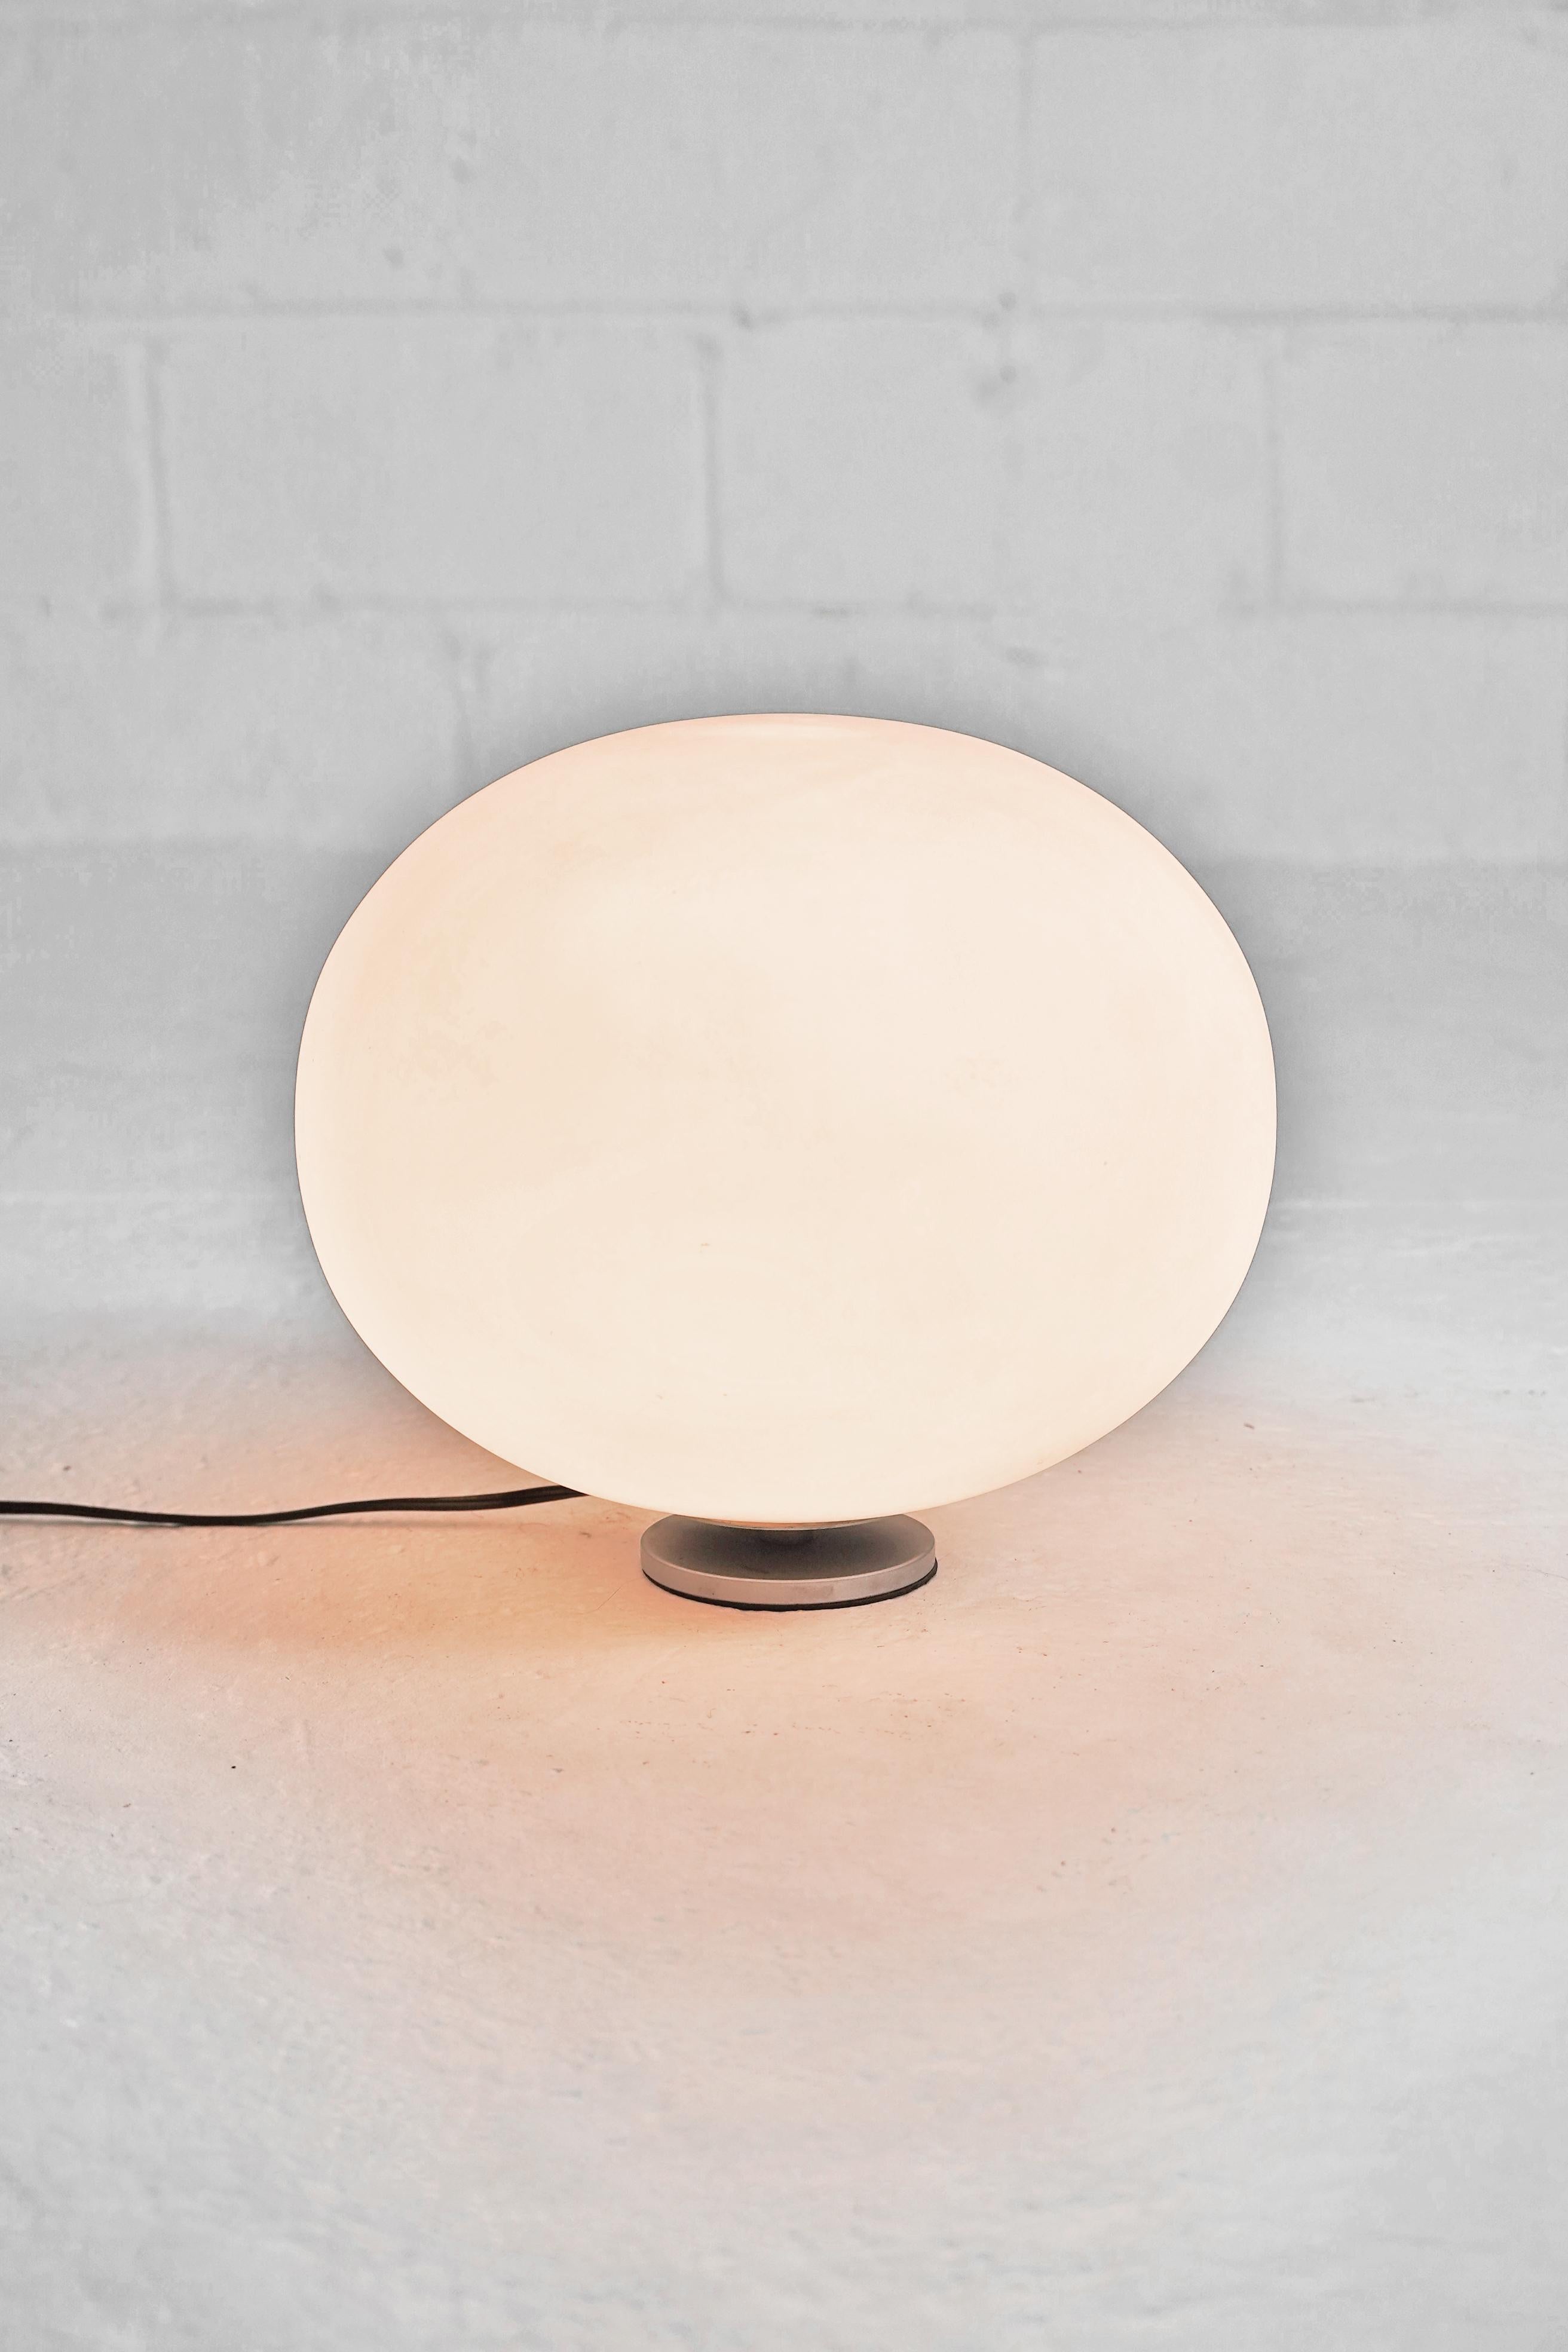 Stunning frosted glass bubble lamp in the style of Laurel Lamp Co.